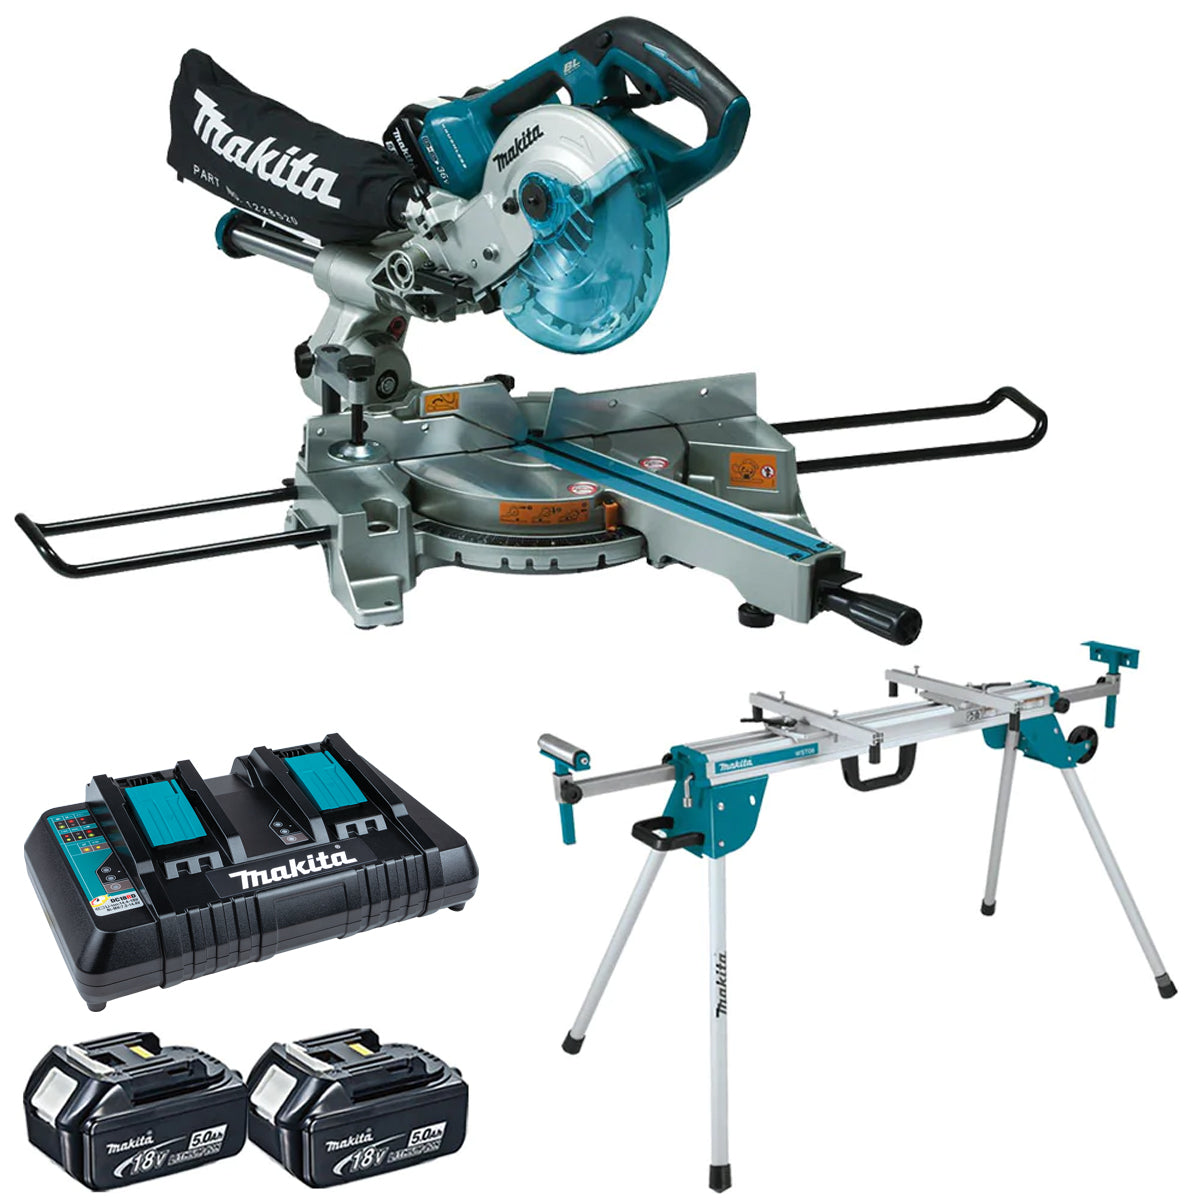 Makita DLS714NZ 36V Brushless Slide Compound Mitre Saw With 2 x 5.0Ah Batteries Charger & Stand